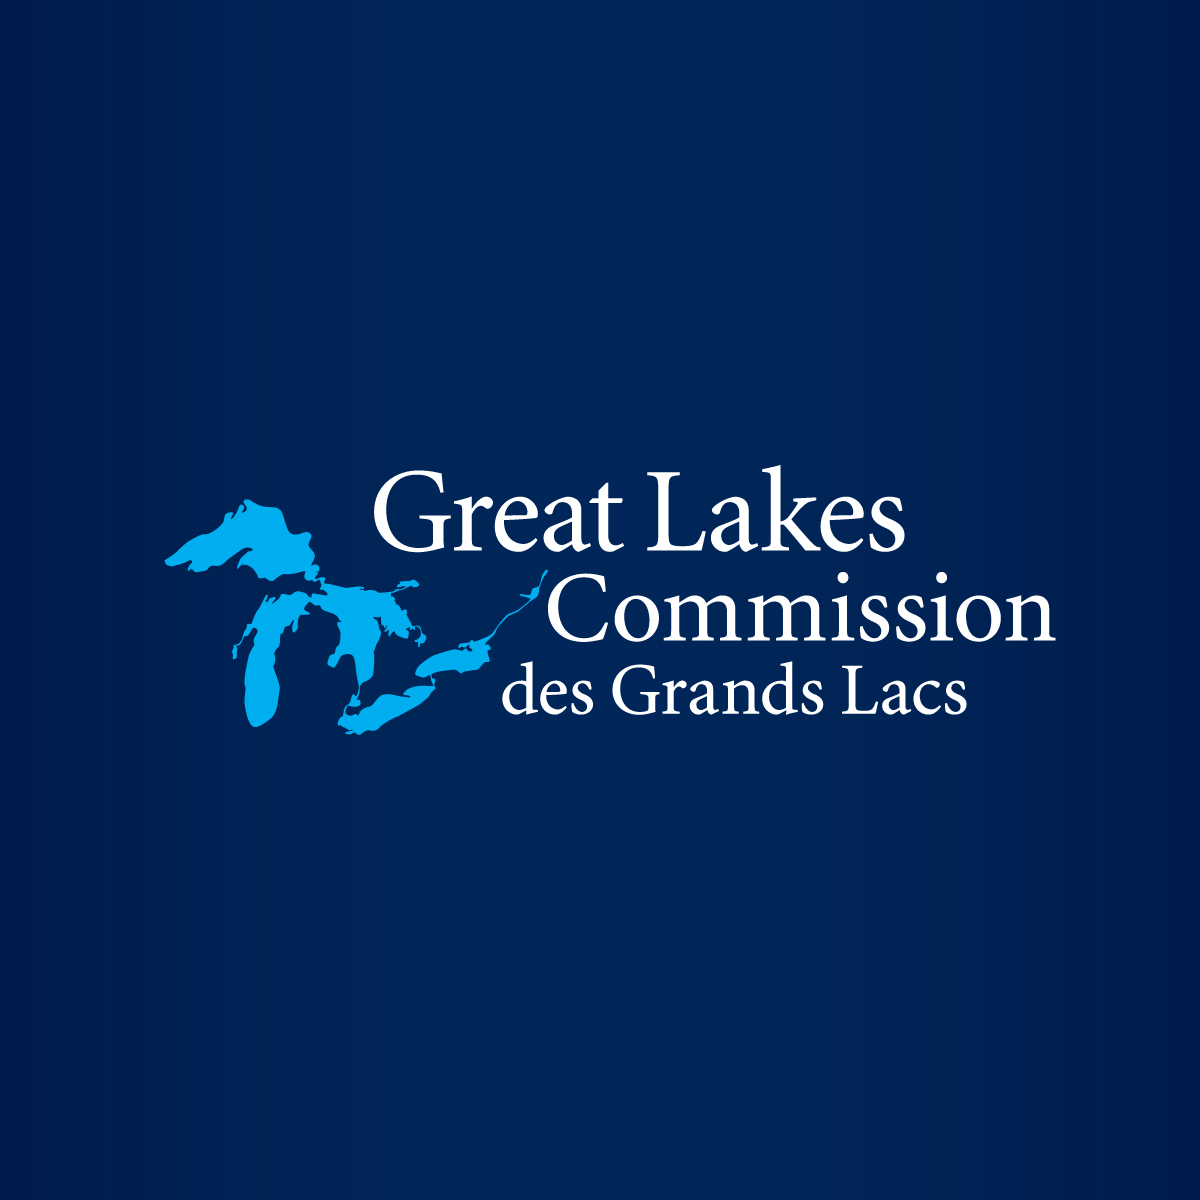 tvo launches great lakes untamed series sept 26